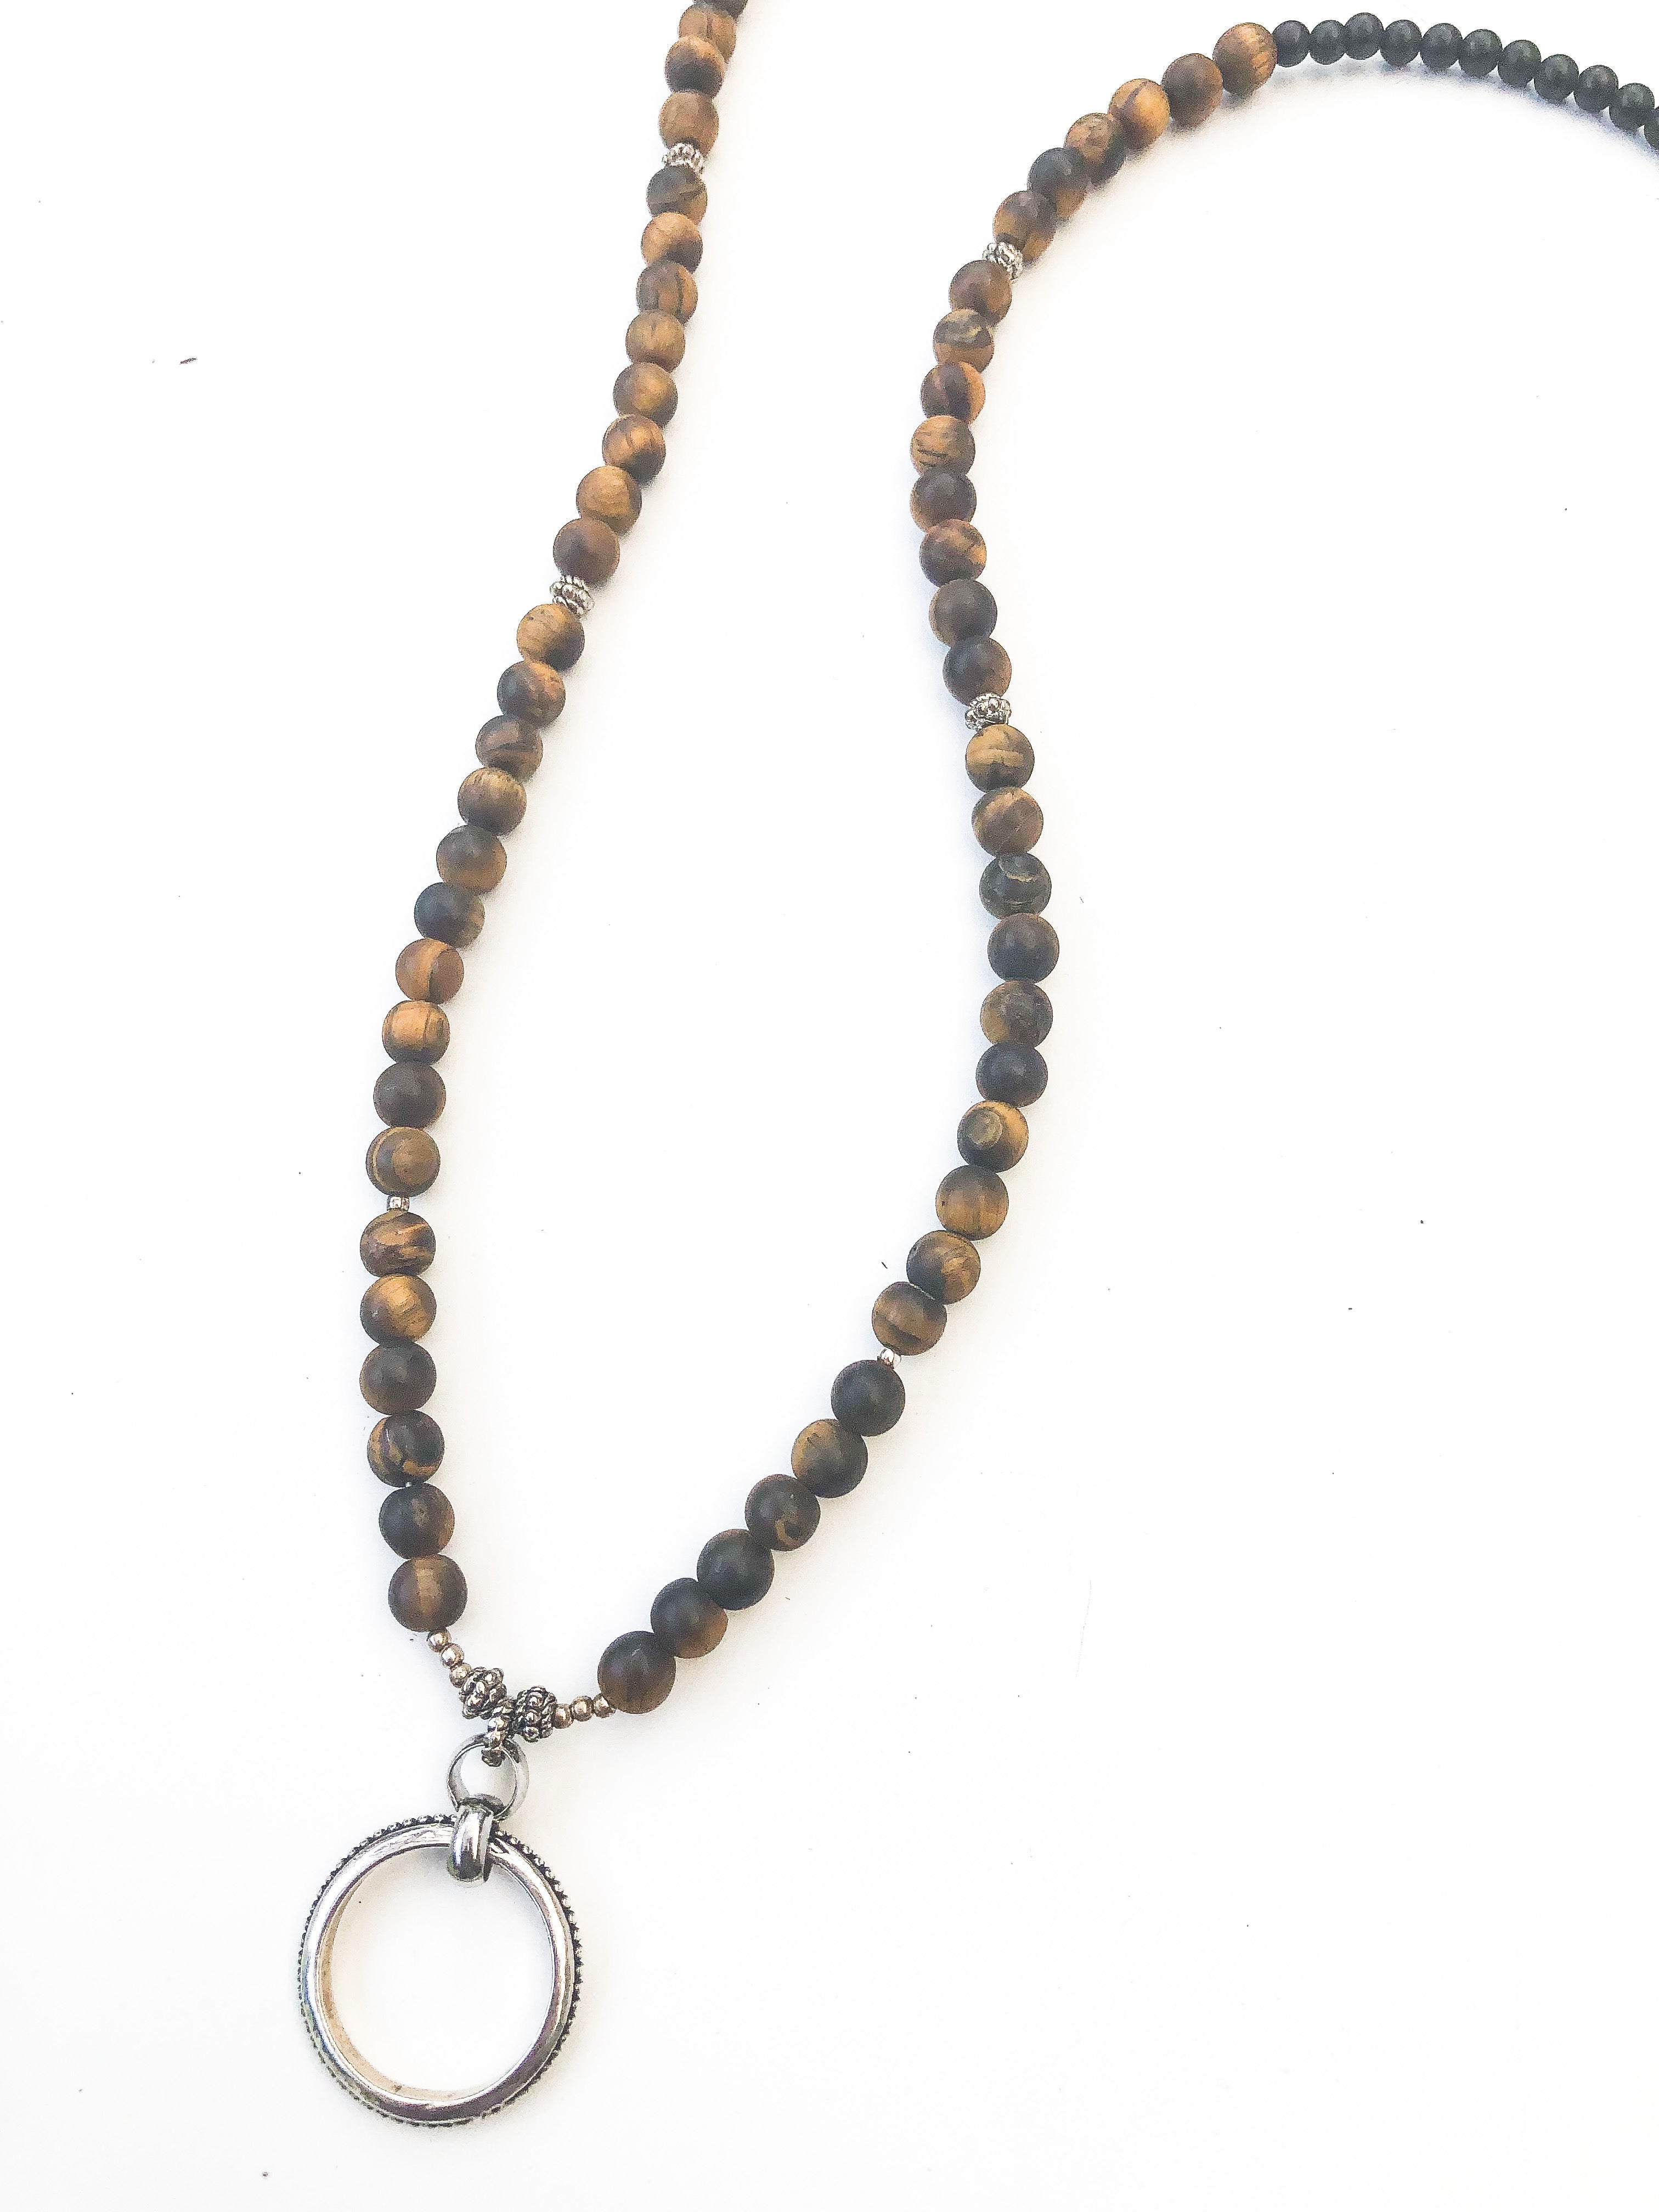 Tigers Eye and Black Onyx EyeRing Necklace